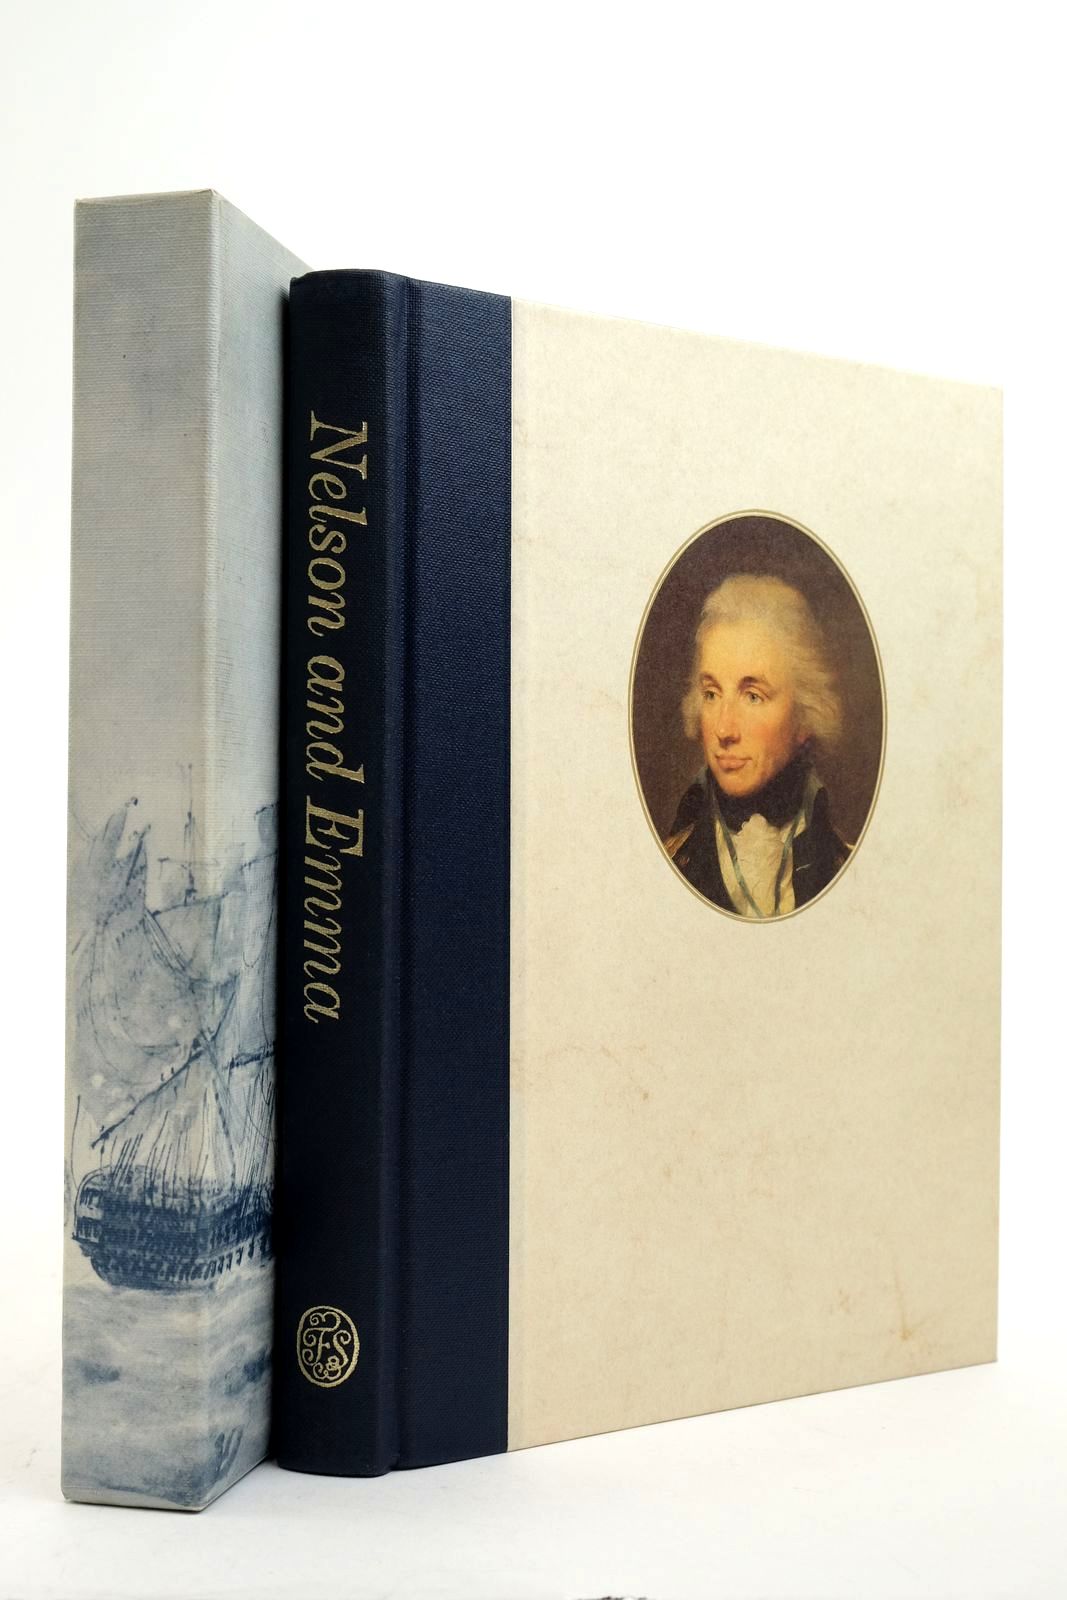 Photo of NELSON AND EMMA written by Hudson, Roger published by Folio Society (STOCK CODE: 2139081)  for sale by Stella & Rose's Books